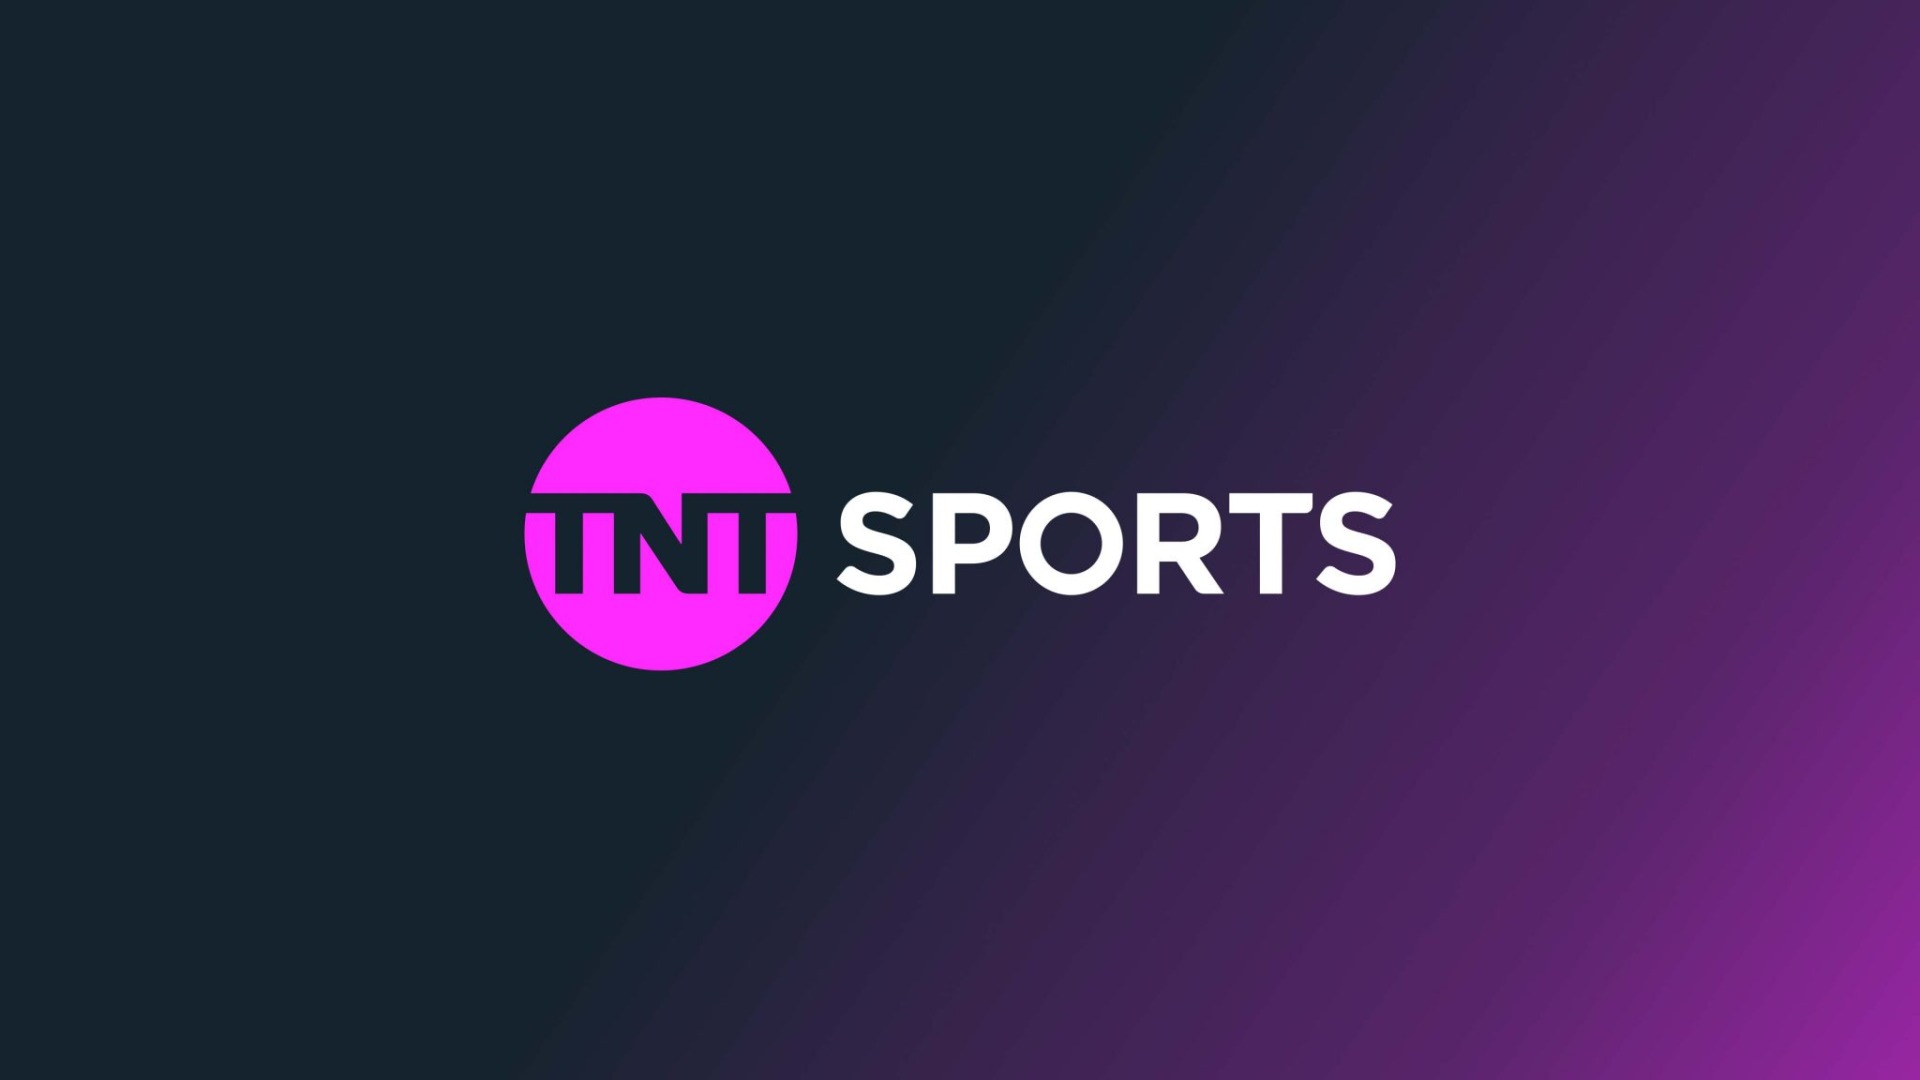 BT Sport to be Rebranded as TNT Sports: A New Era in Premium Sports Broadcasting